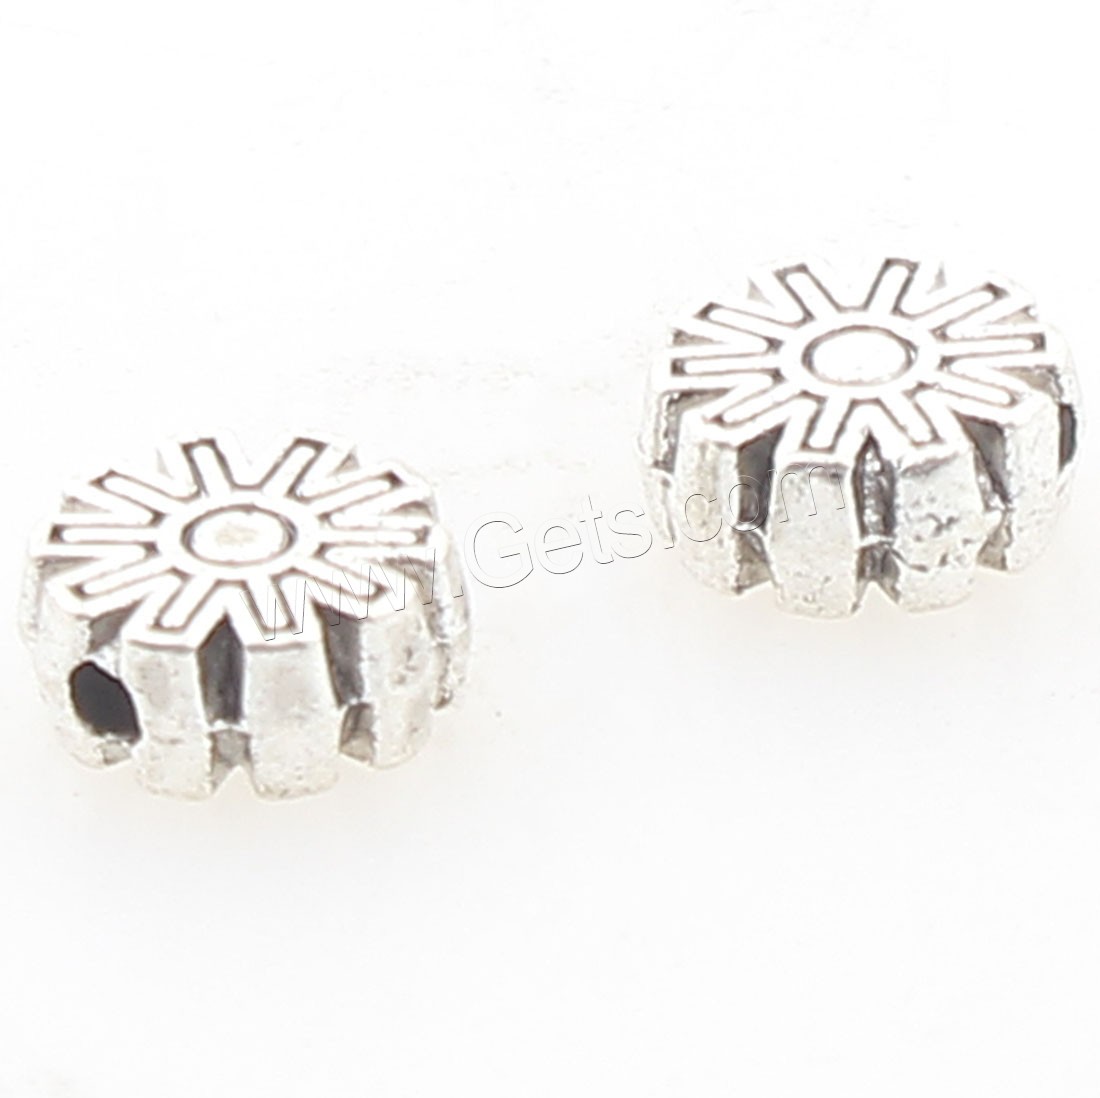 Zinc Alloy Jewelry Beads, antique silver color plated, 5x5x2mm, Hole:Approx 1mm, Approx 1784PCs/Bag, Sold By Bag